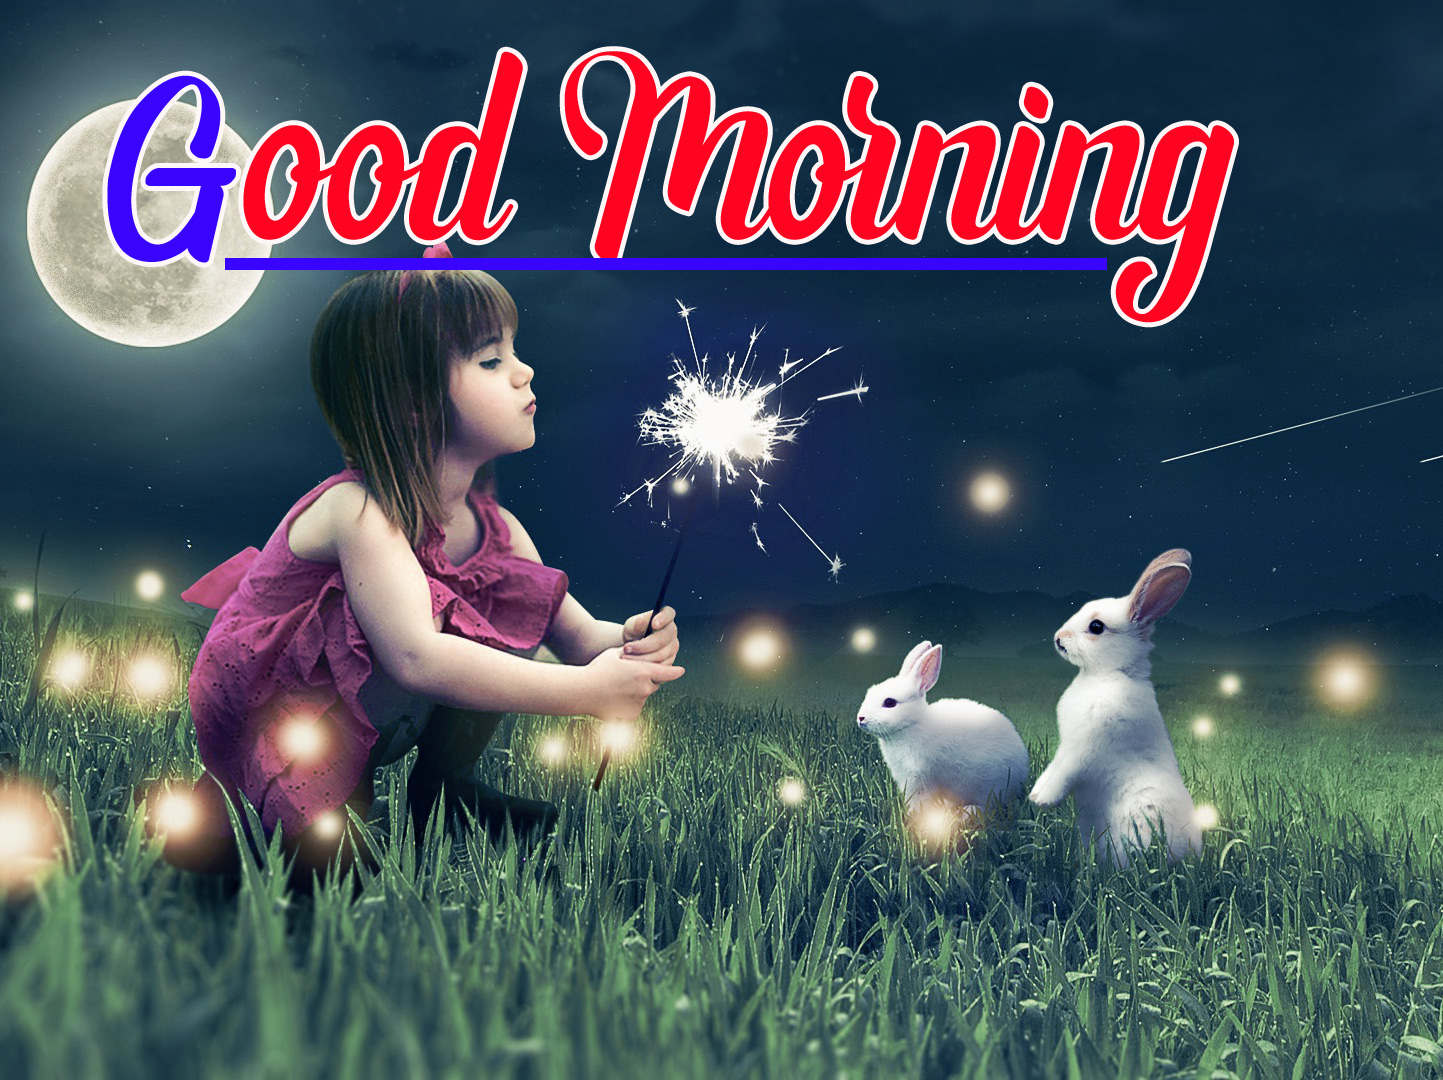 1080p Good Morning Images Photo for Facebook 